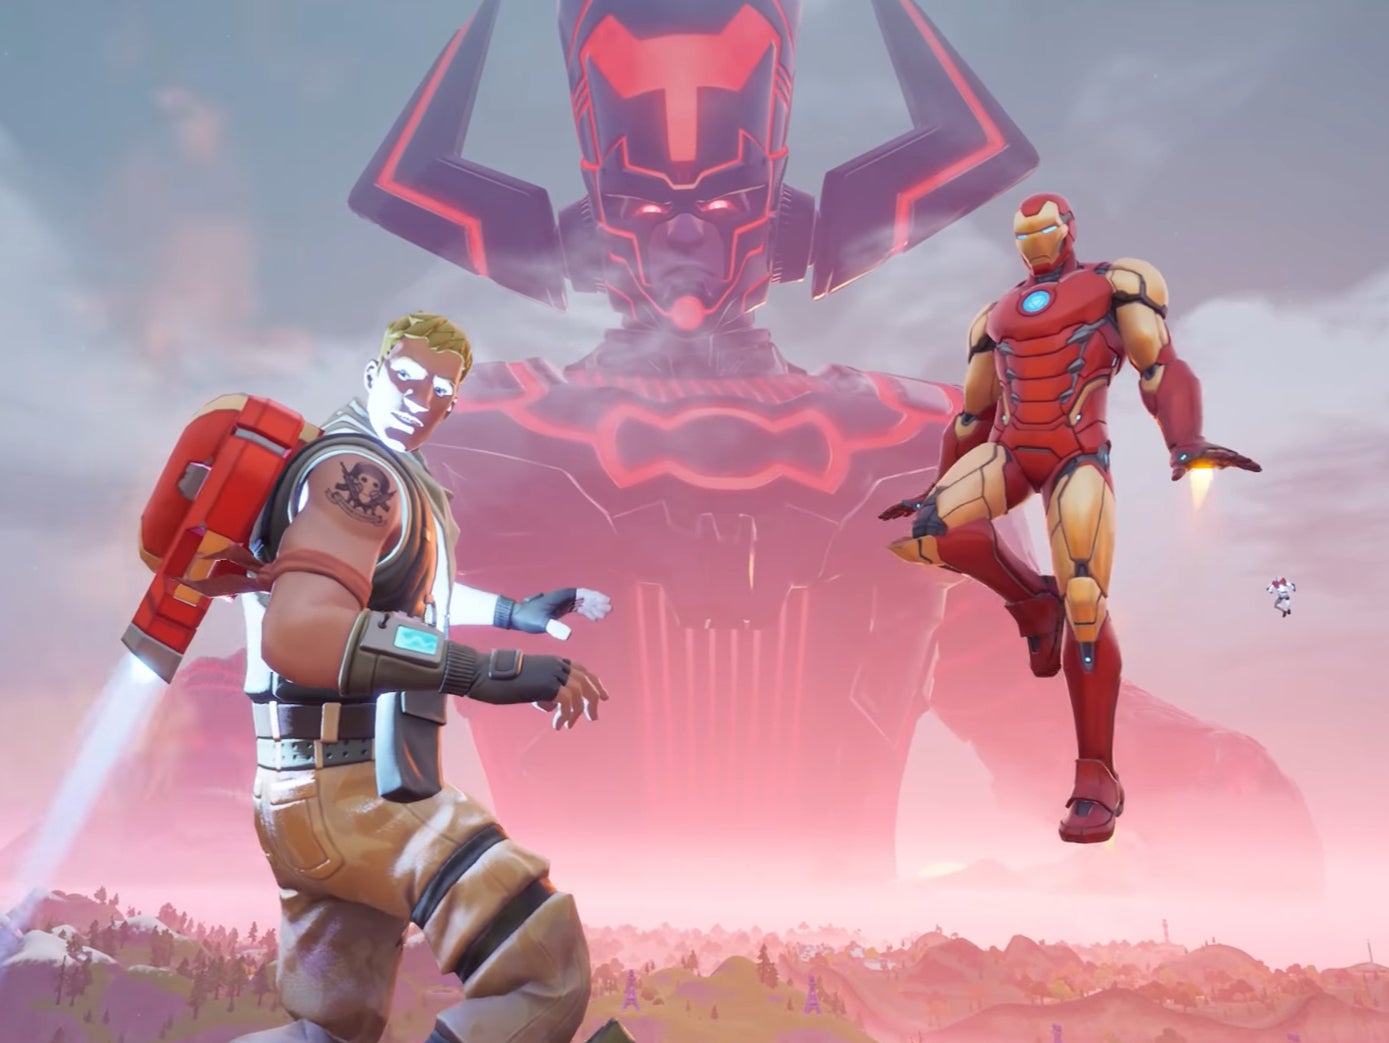 A still from the Galactus event in Fortnite